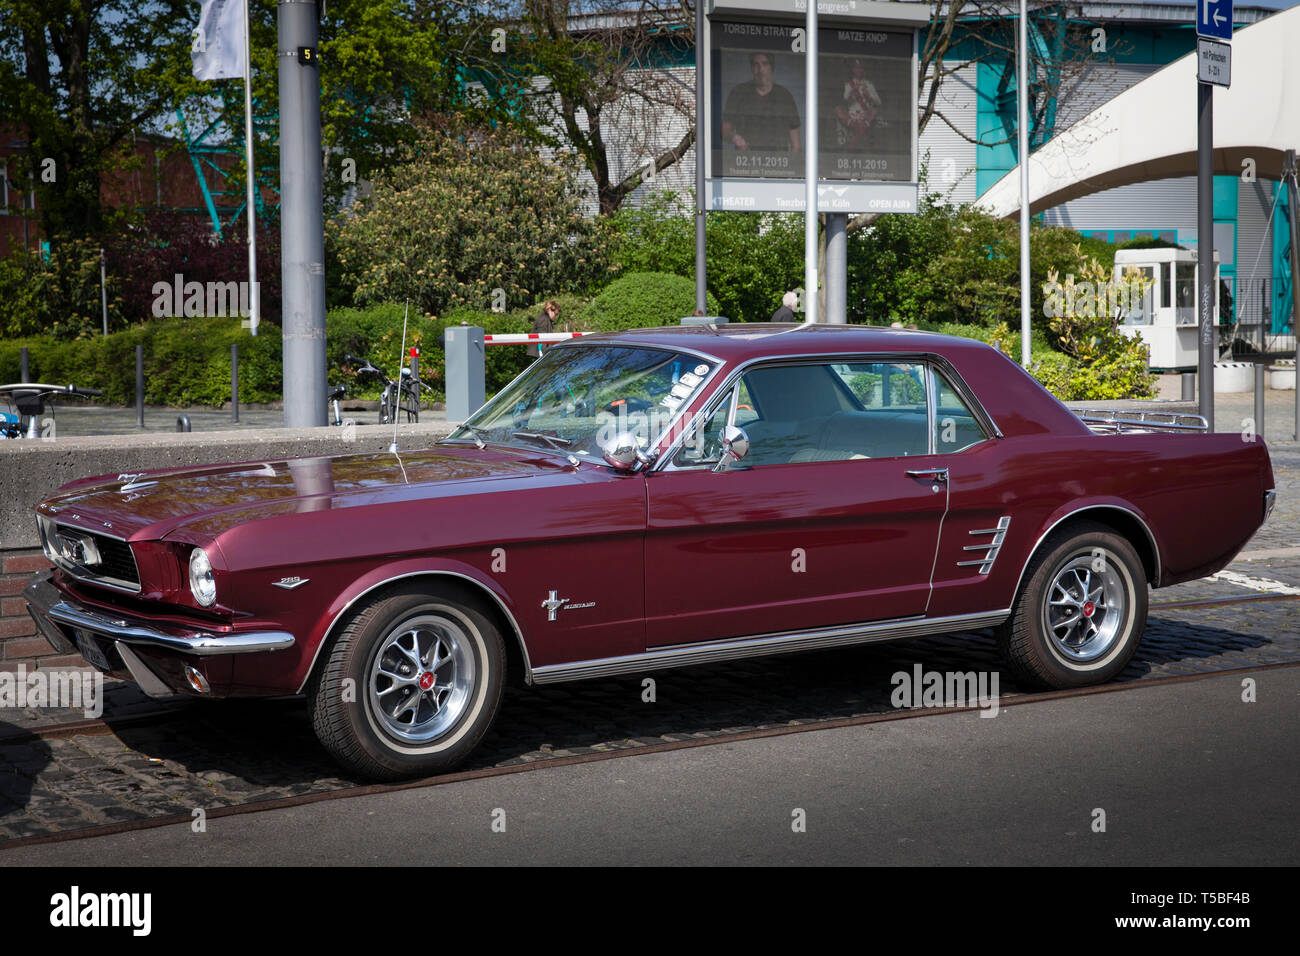 Ford Mustang 289 from the 1960s, Cologne, Germany.  Ford Mustang 289 aus den 60er Jahren, Koeln, Deutschland. Stock Photo